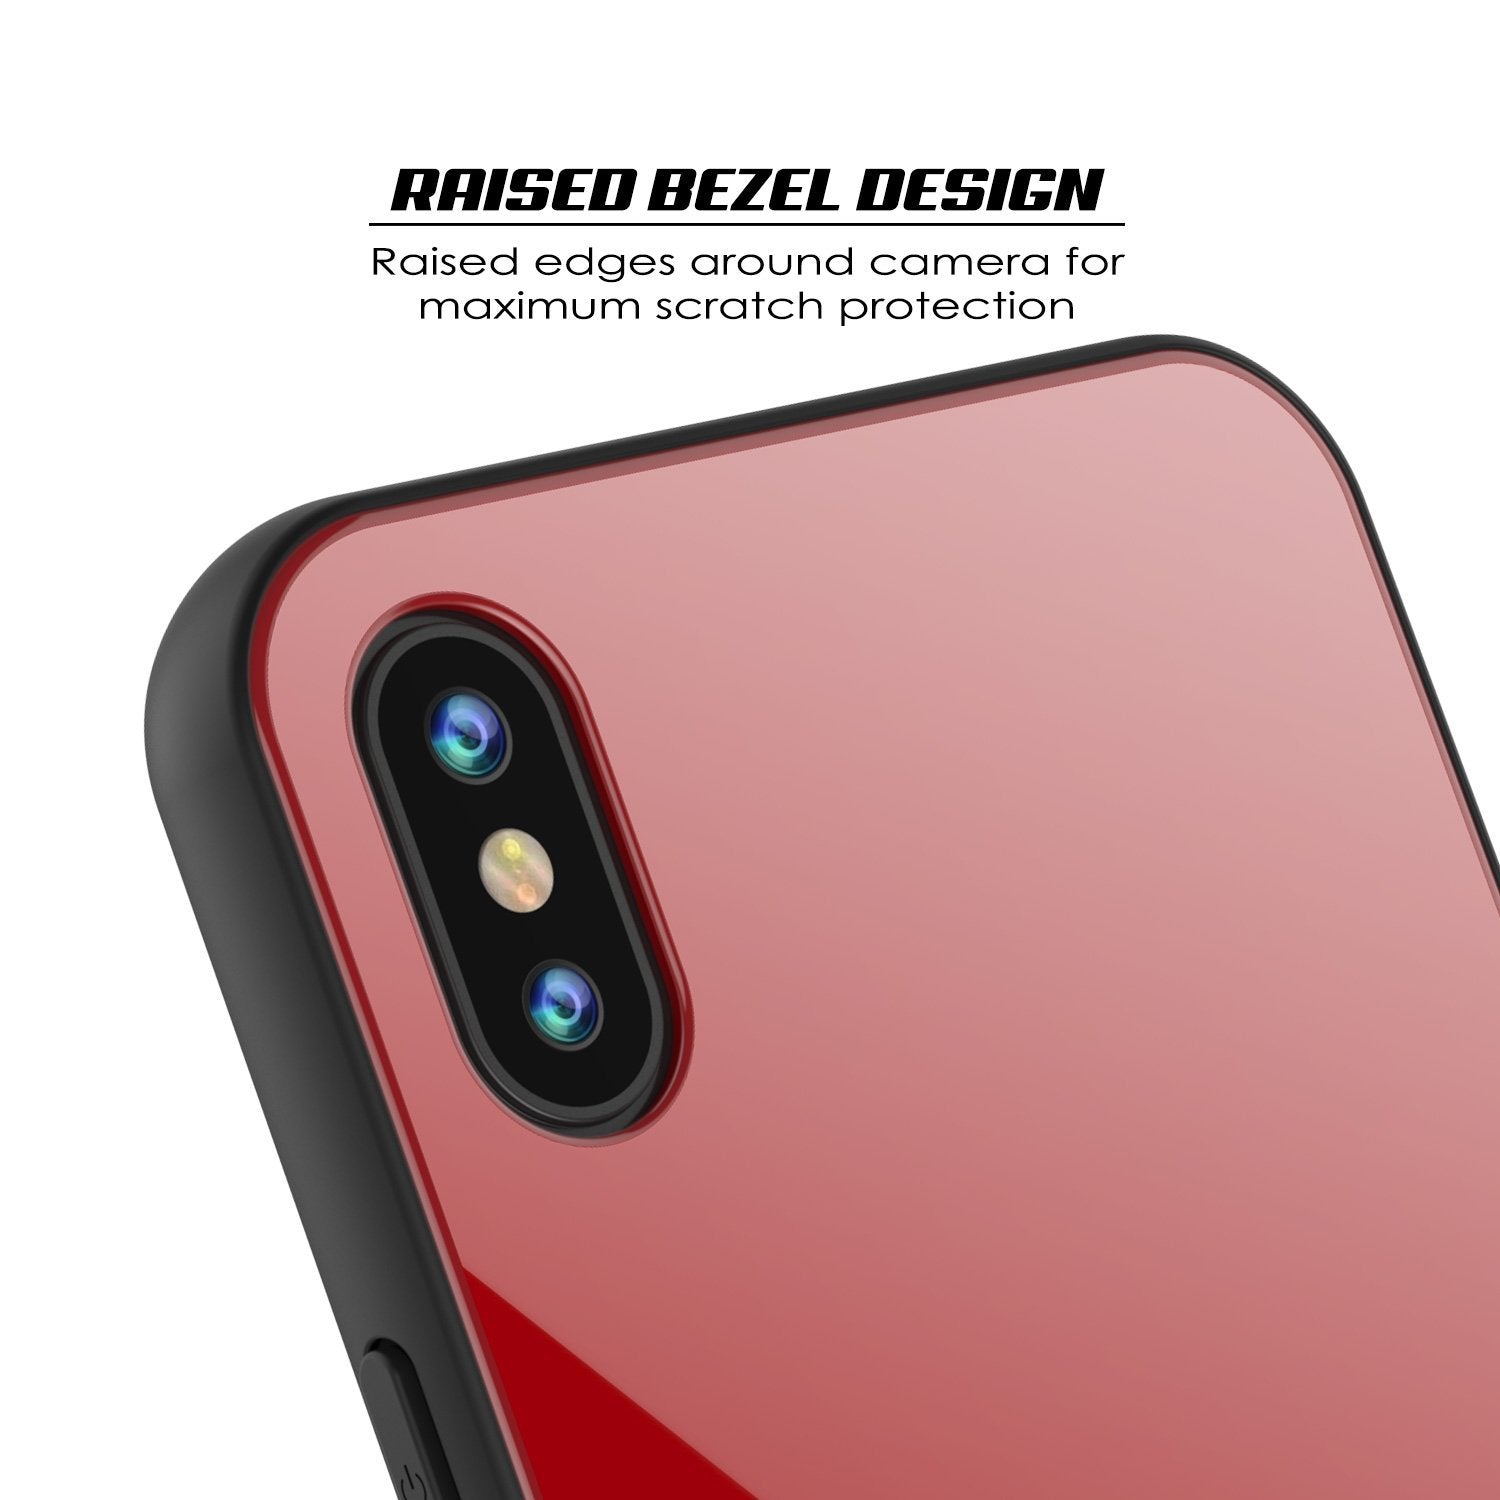 iPhone 8 Case, Punkcase GlassShield Ultra Thin Protective 9H Full Body Tempered Glass Cover W/ Drop Protection & Non Slip Grip for Apple iPhone 7 / Apple iPhone 8 (Red) - PunkCase NZ